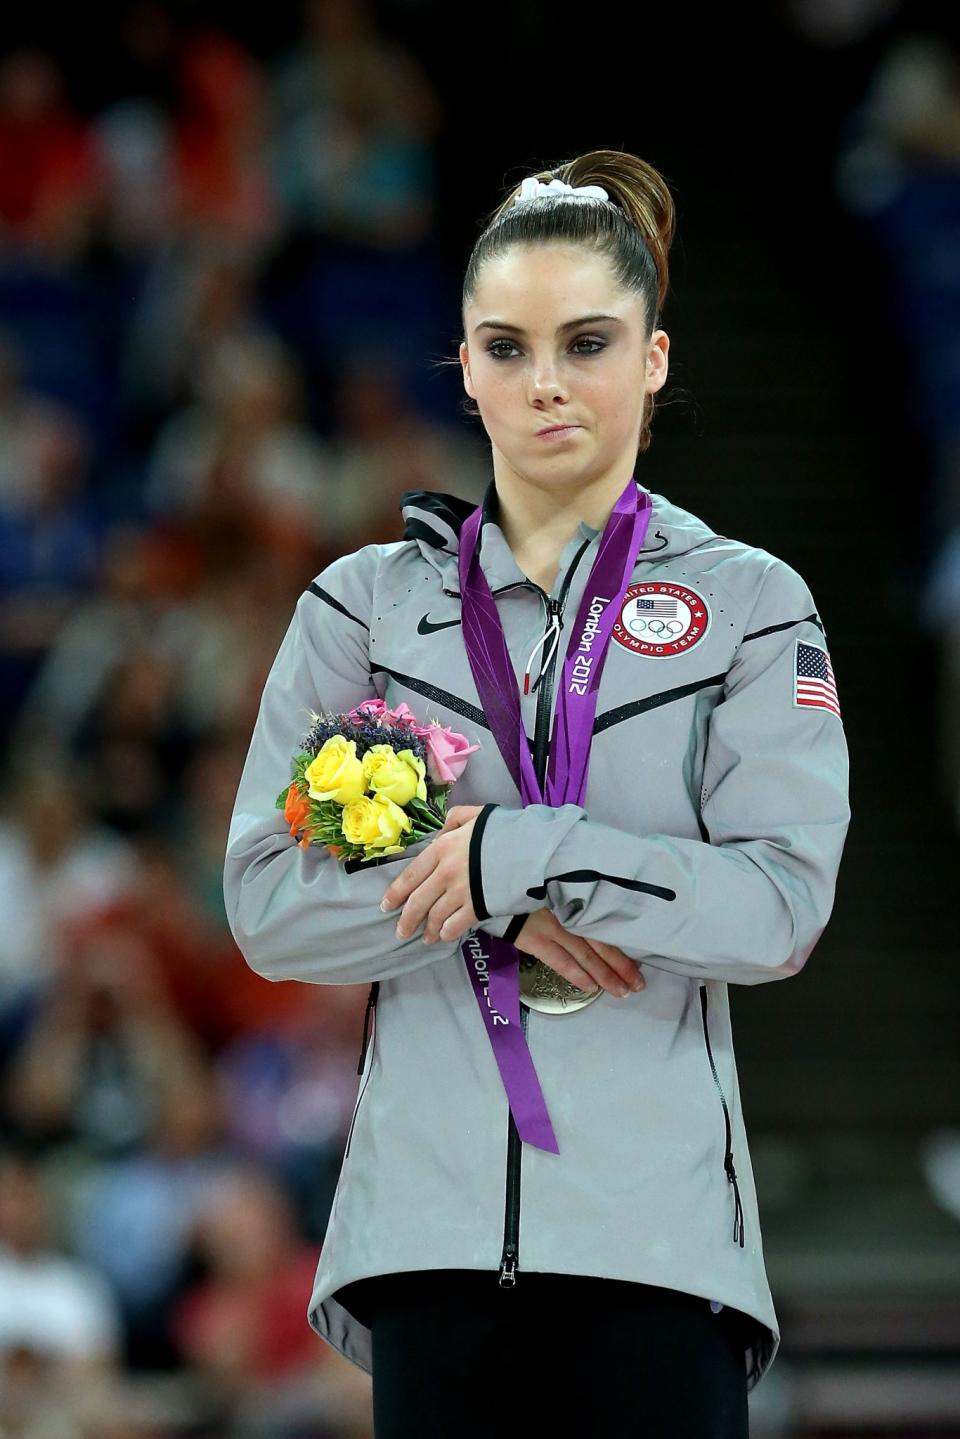 <p>McKayla Maroney Maroney of the United States stands on the podium with her silver medal during the medal ceremony following the Artistic Gymnastics Women’s Vault final on Day 9 of the London 2012 Olympic Games at North Greenwich Arena on August 5, 2012 in London, England. (Photo by Ronald Martinez/Getty Images) </p>